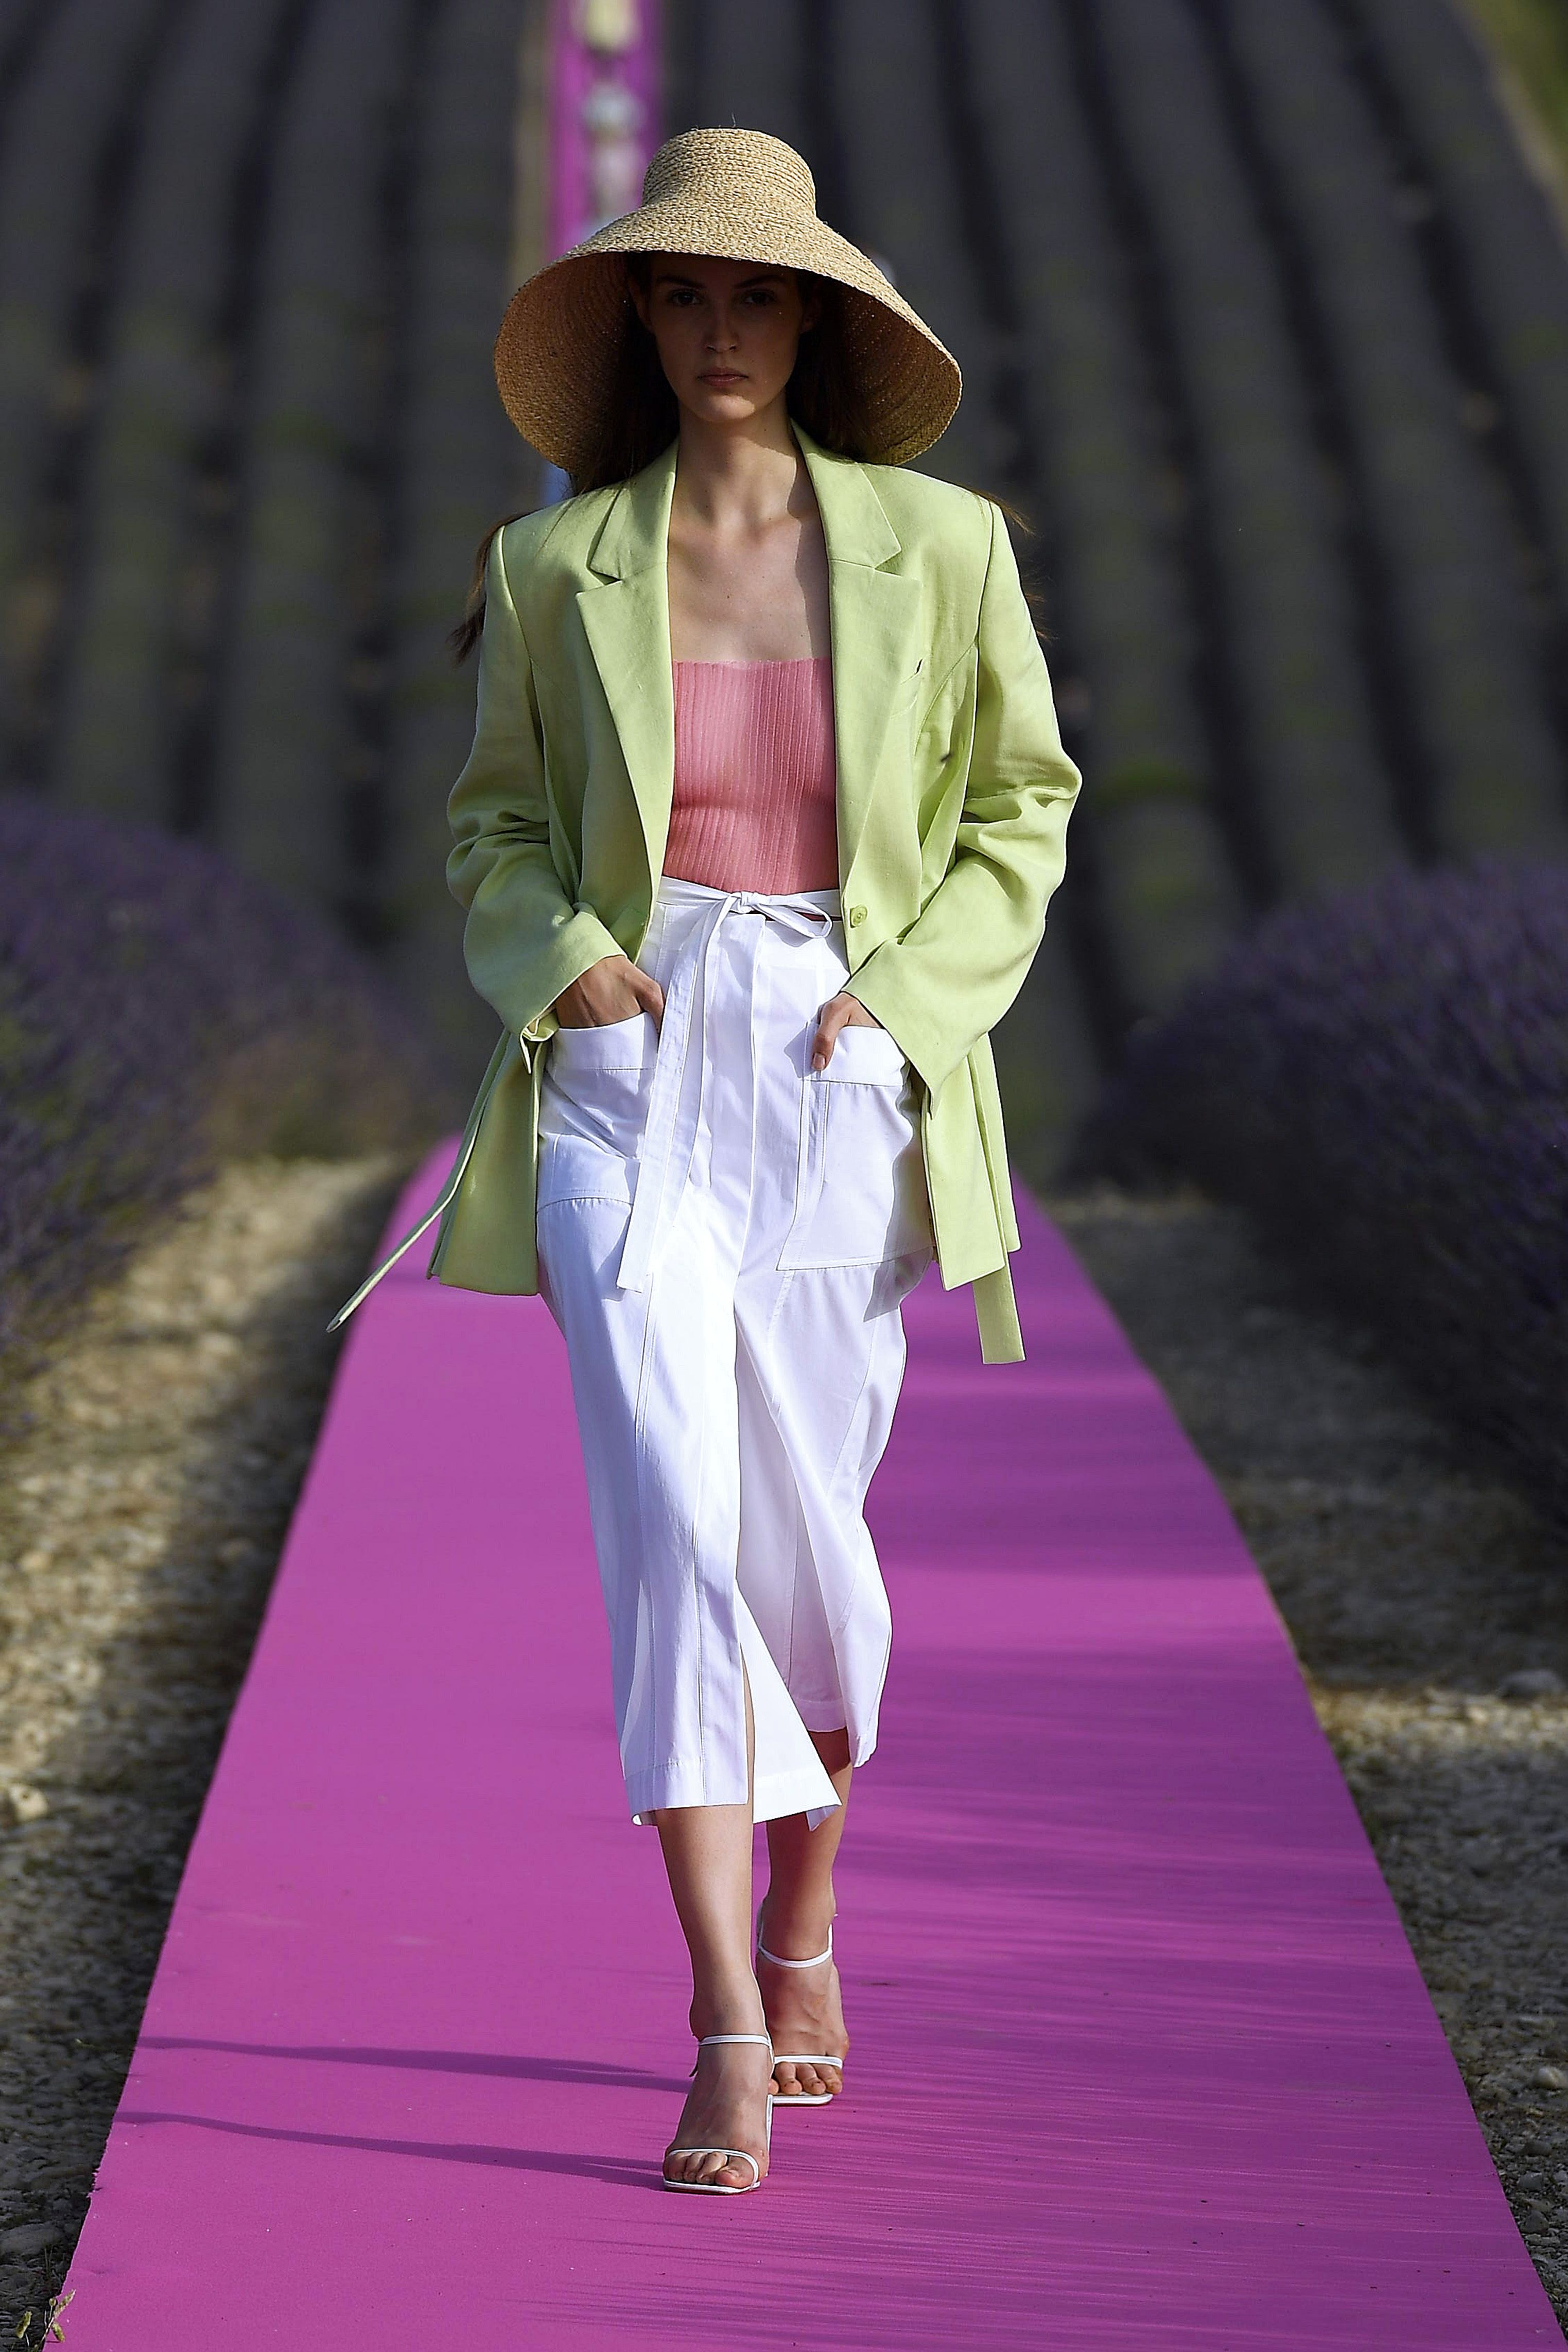 Jacquemus and Mother Nature Collab on Another Stunning Runway Show